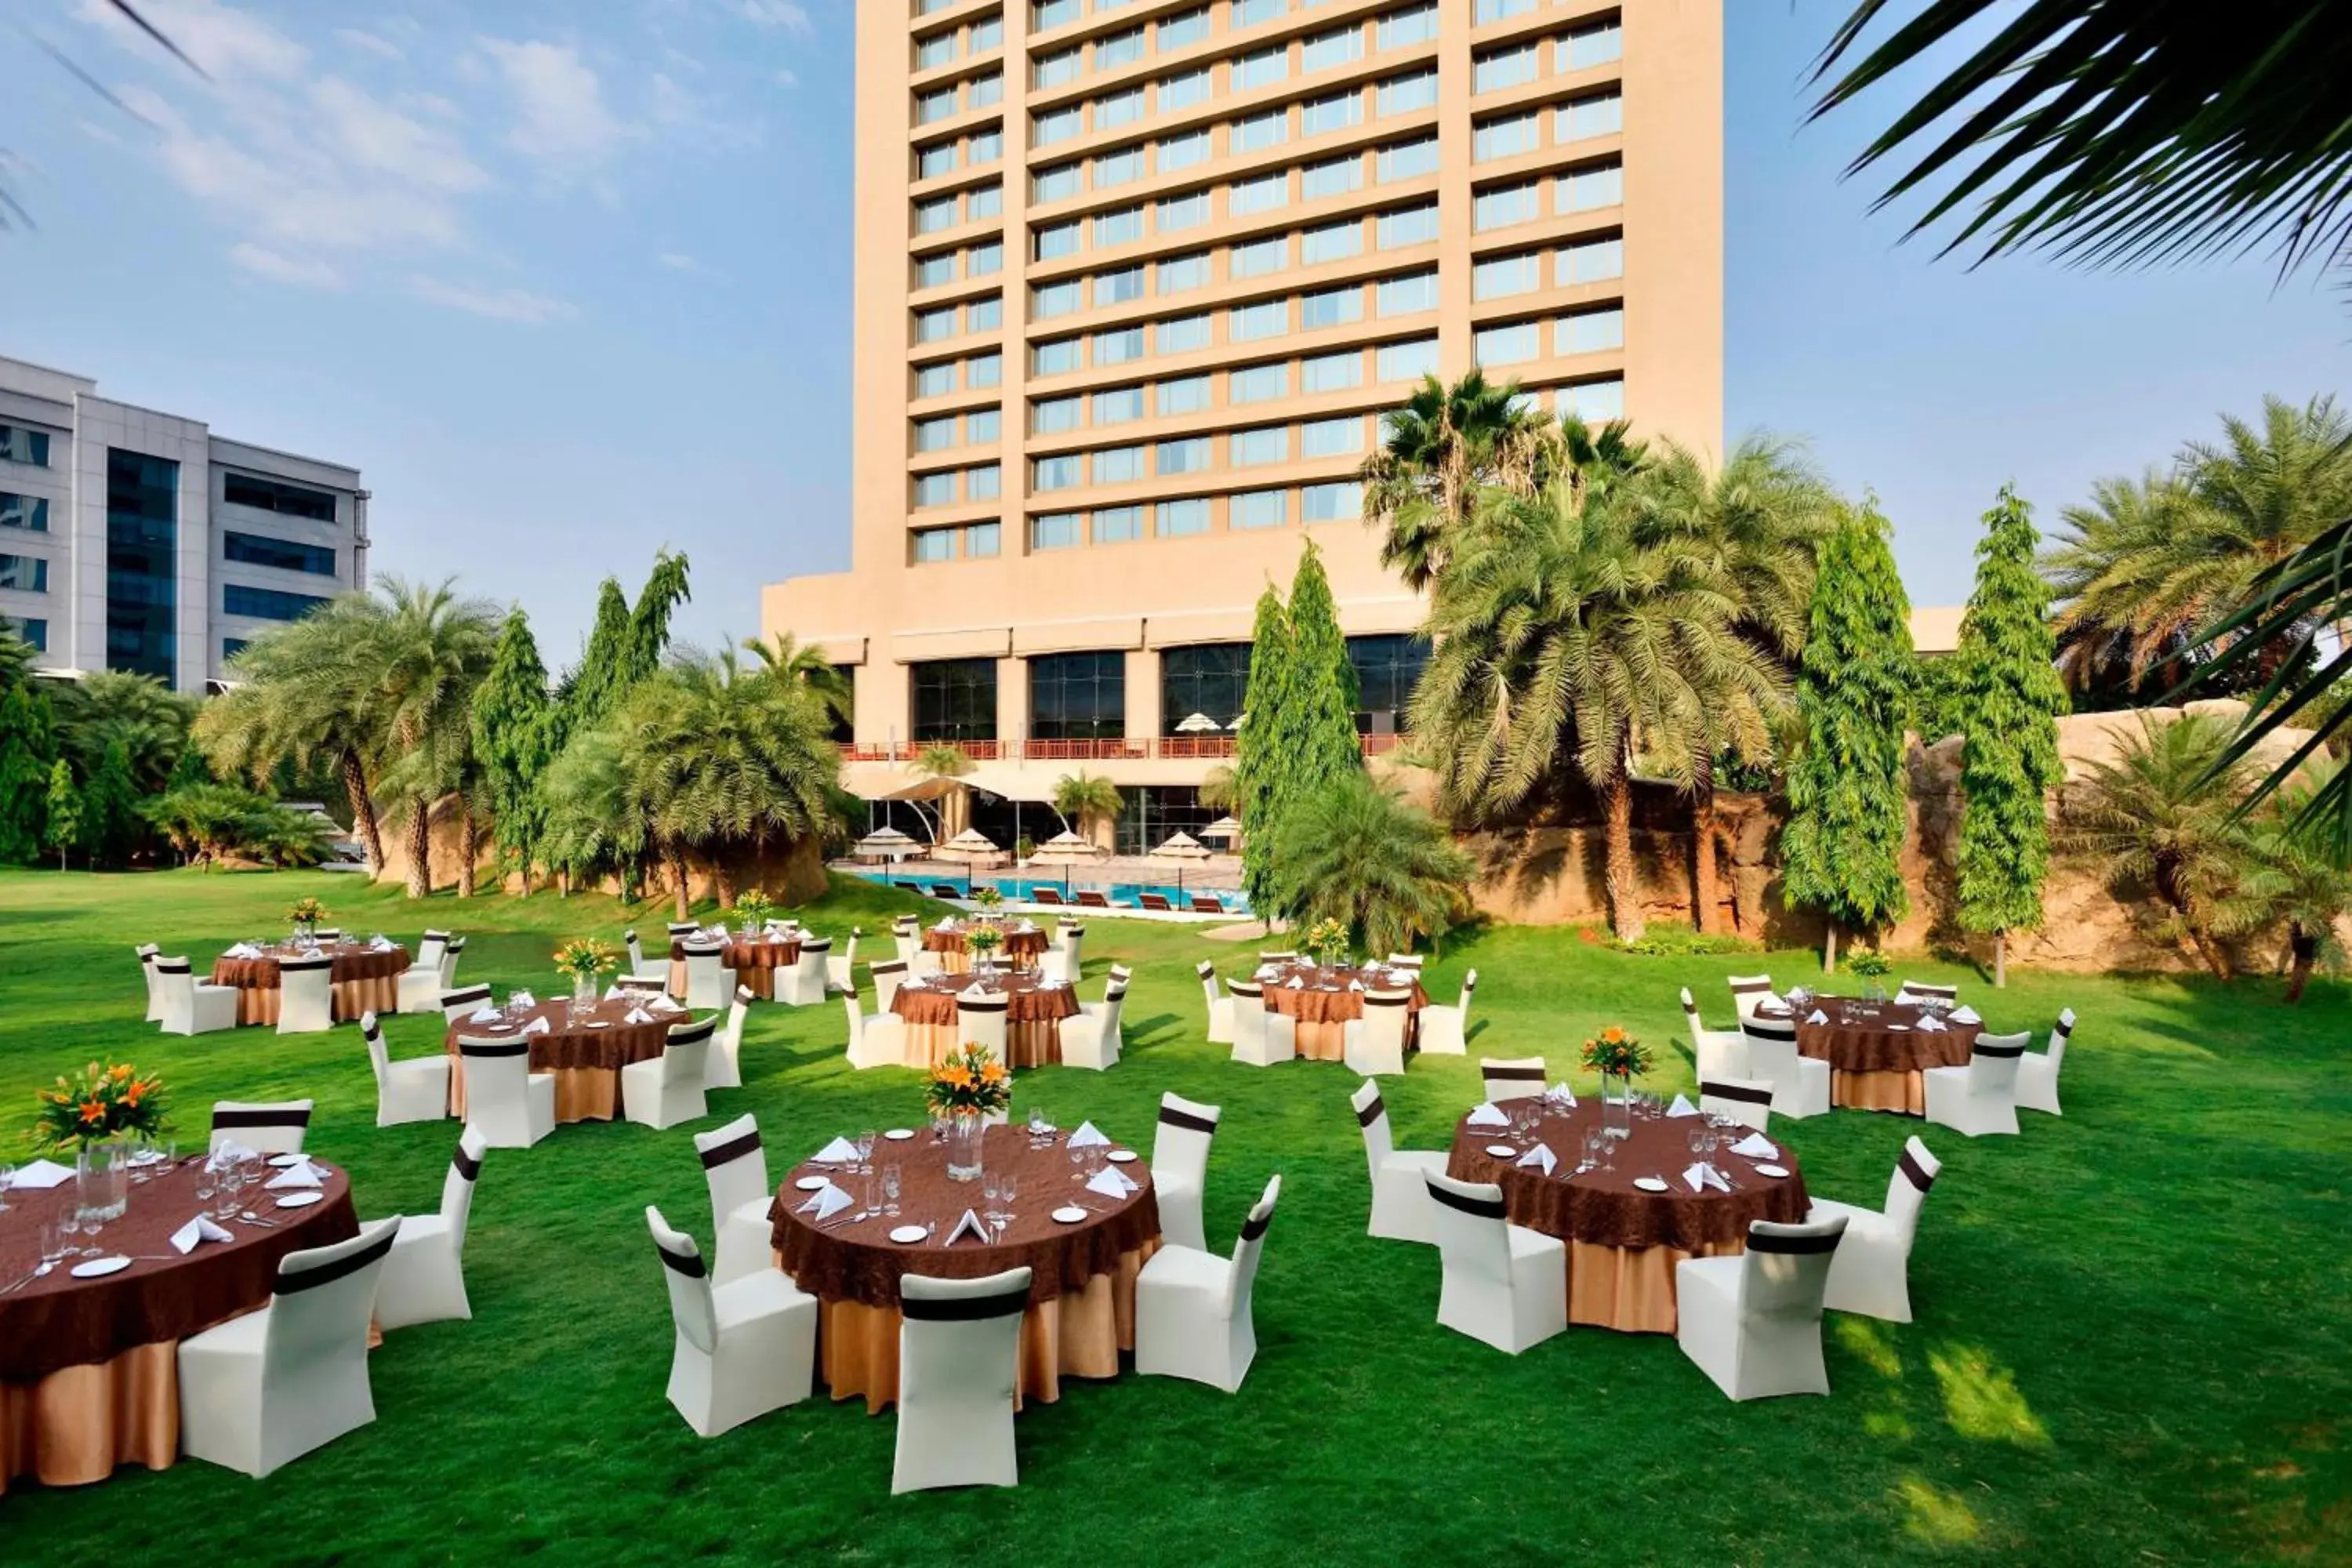 Meeting/conference room, Banquet Facilities in The Westin Hyderabad Mindspace